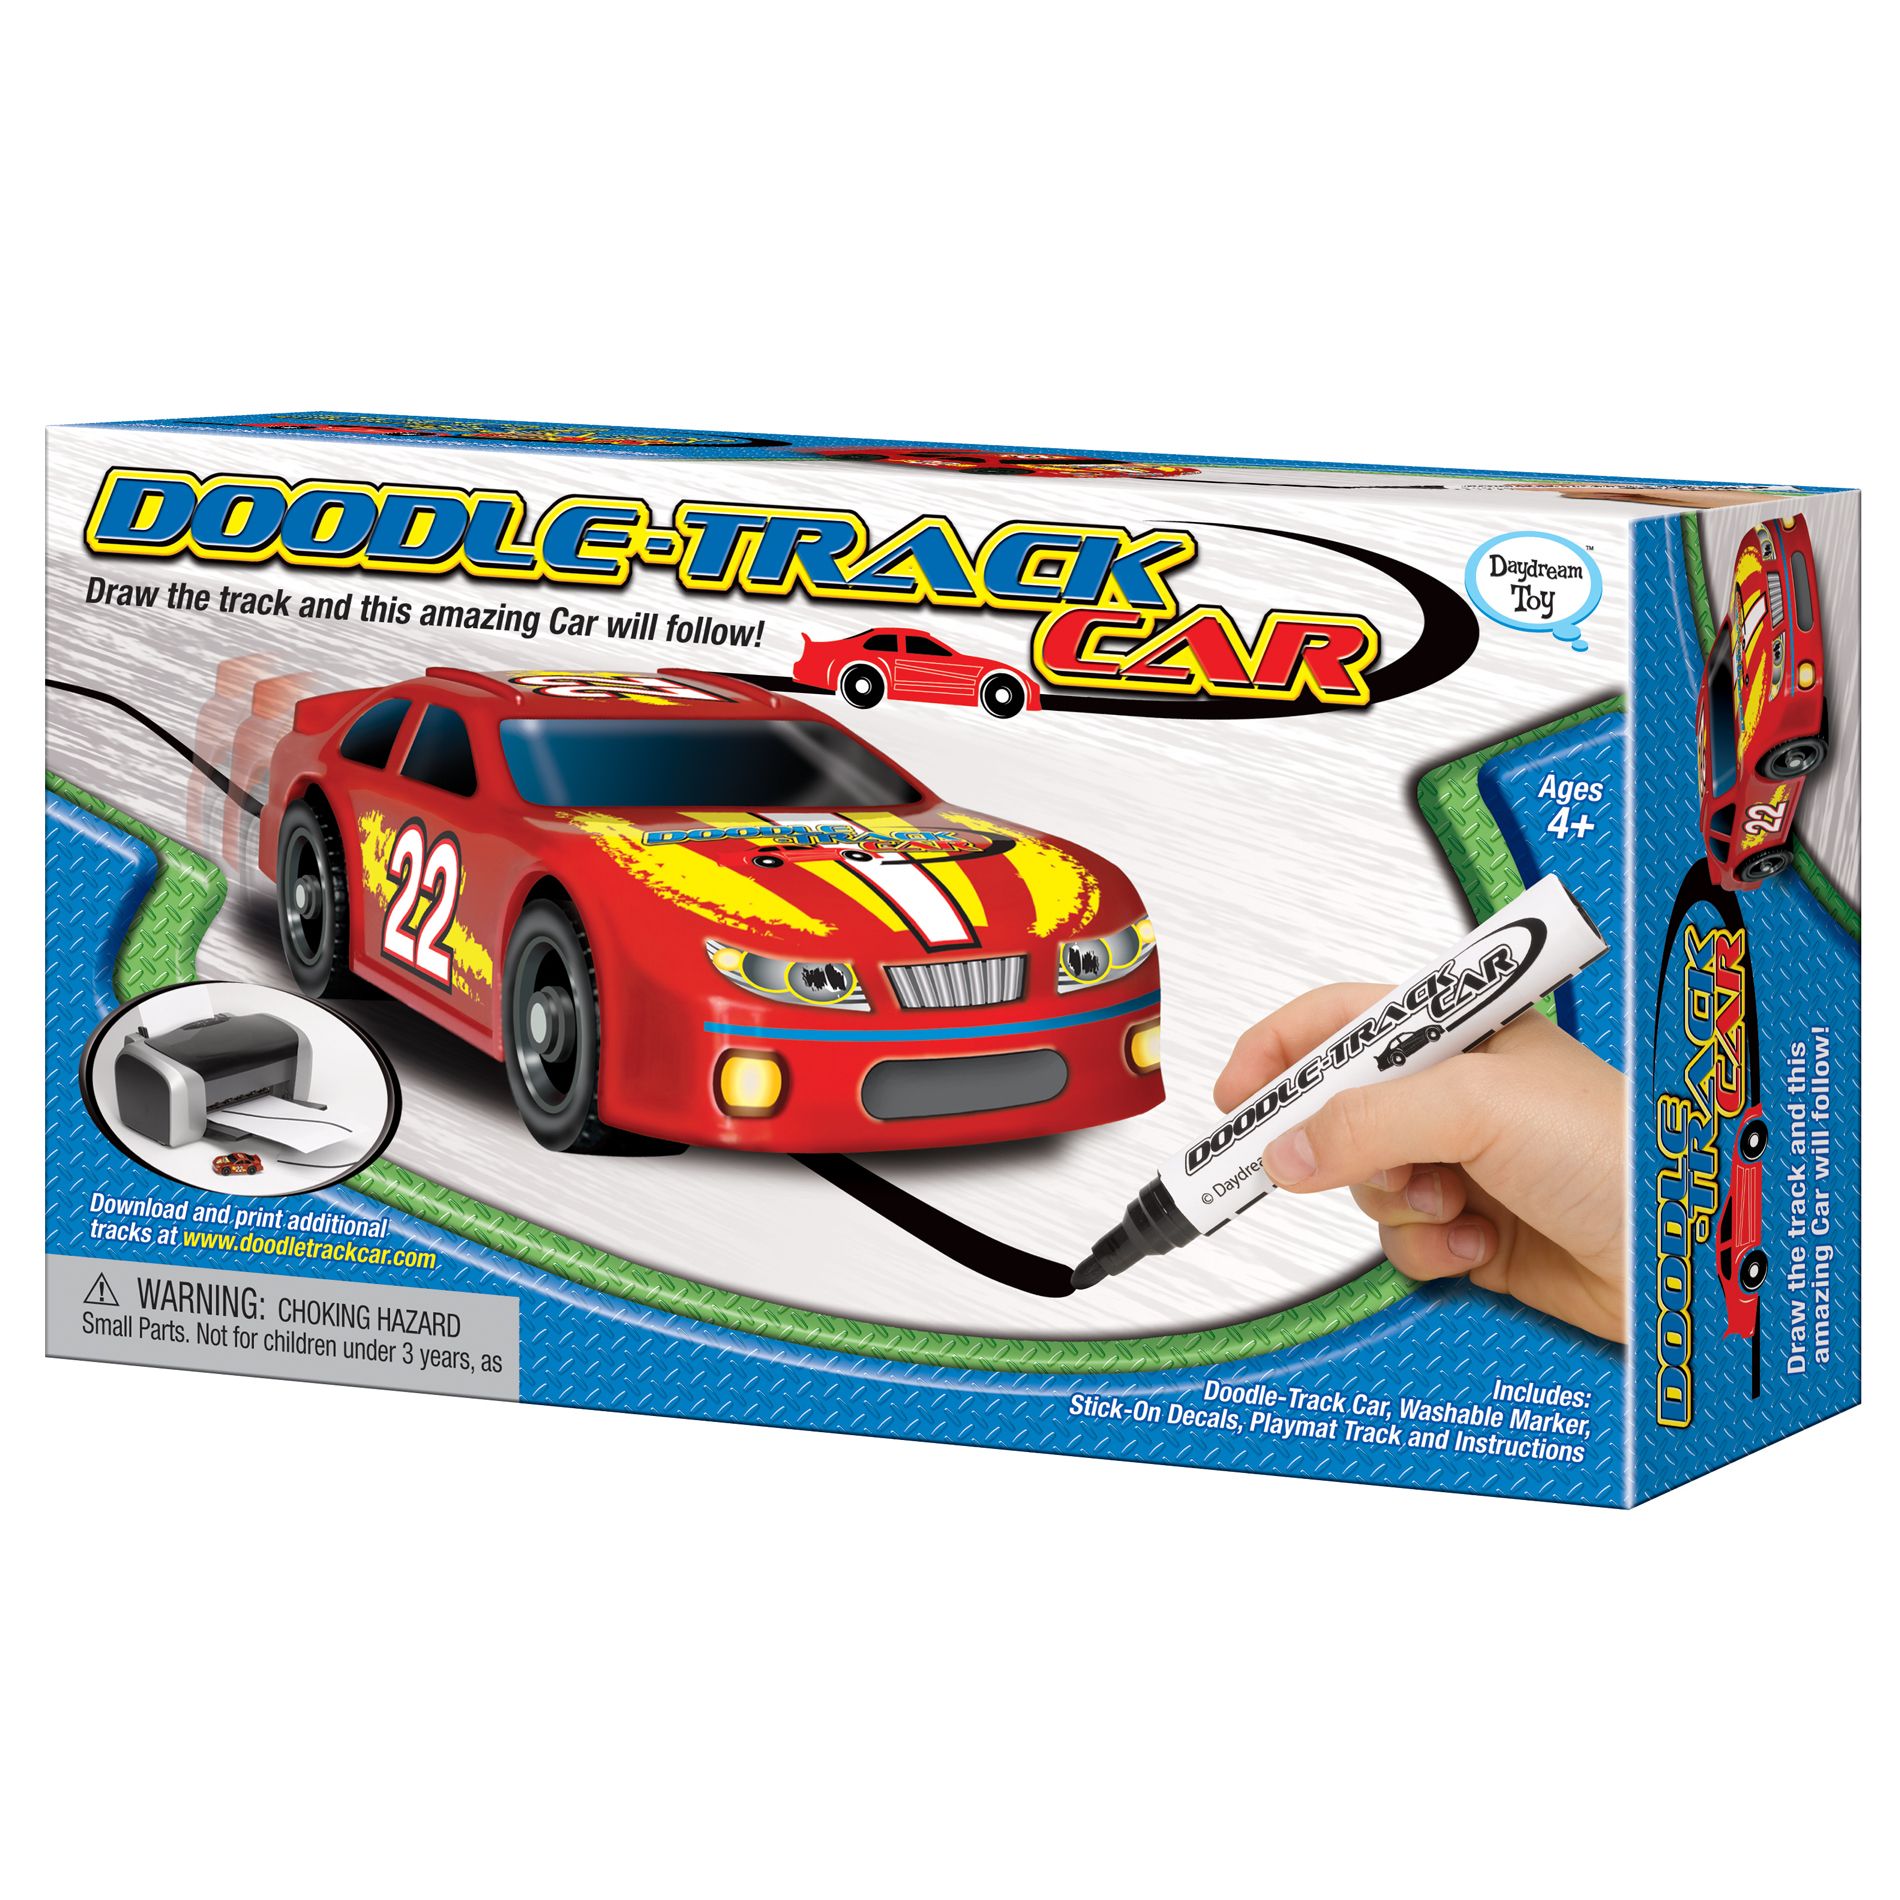 Daydream Toy Doodle Track Car Set Red   Toys & Games   Vehicles